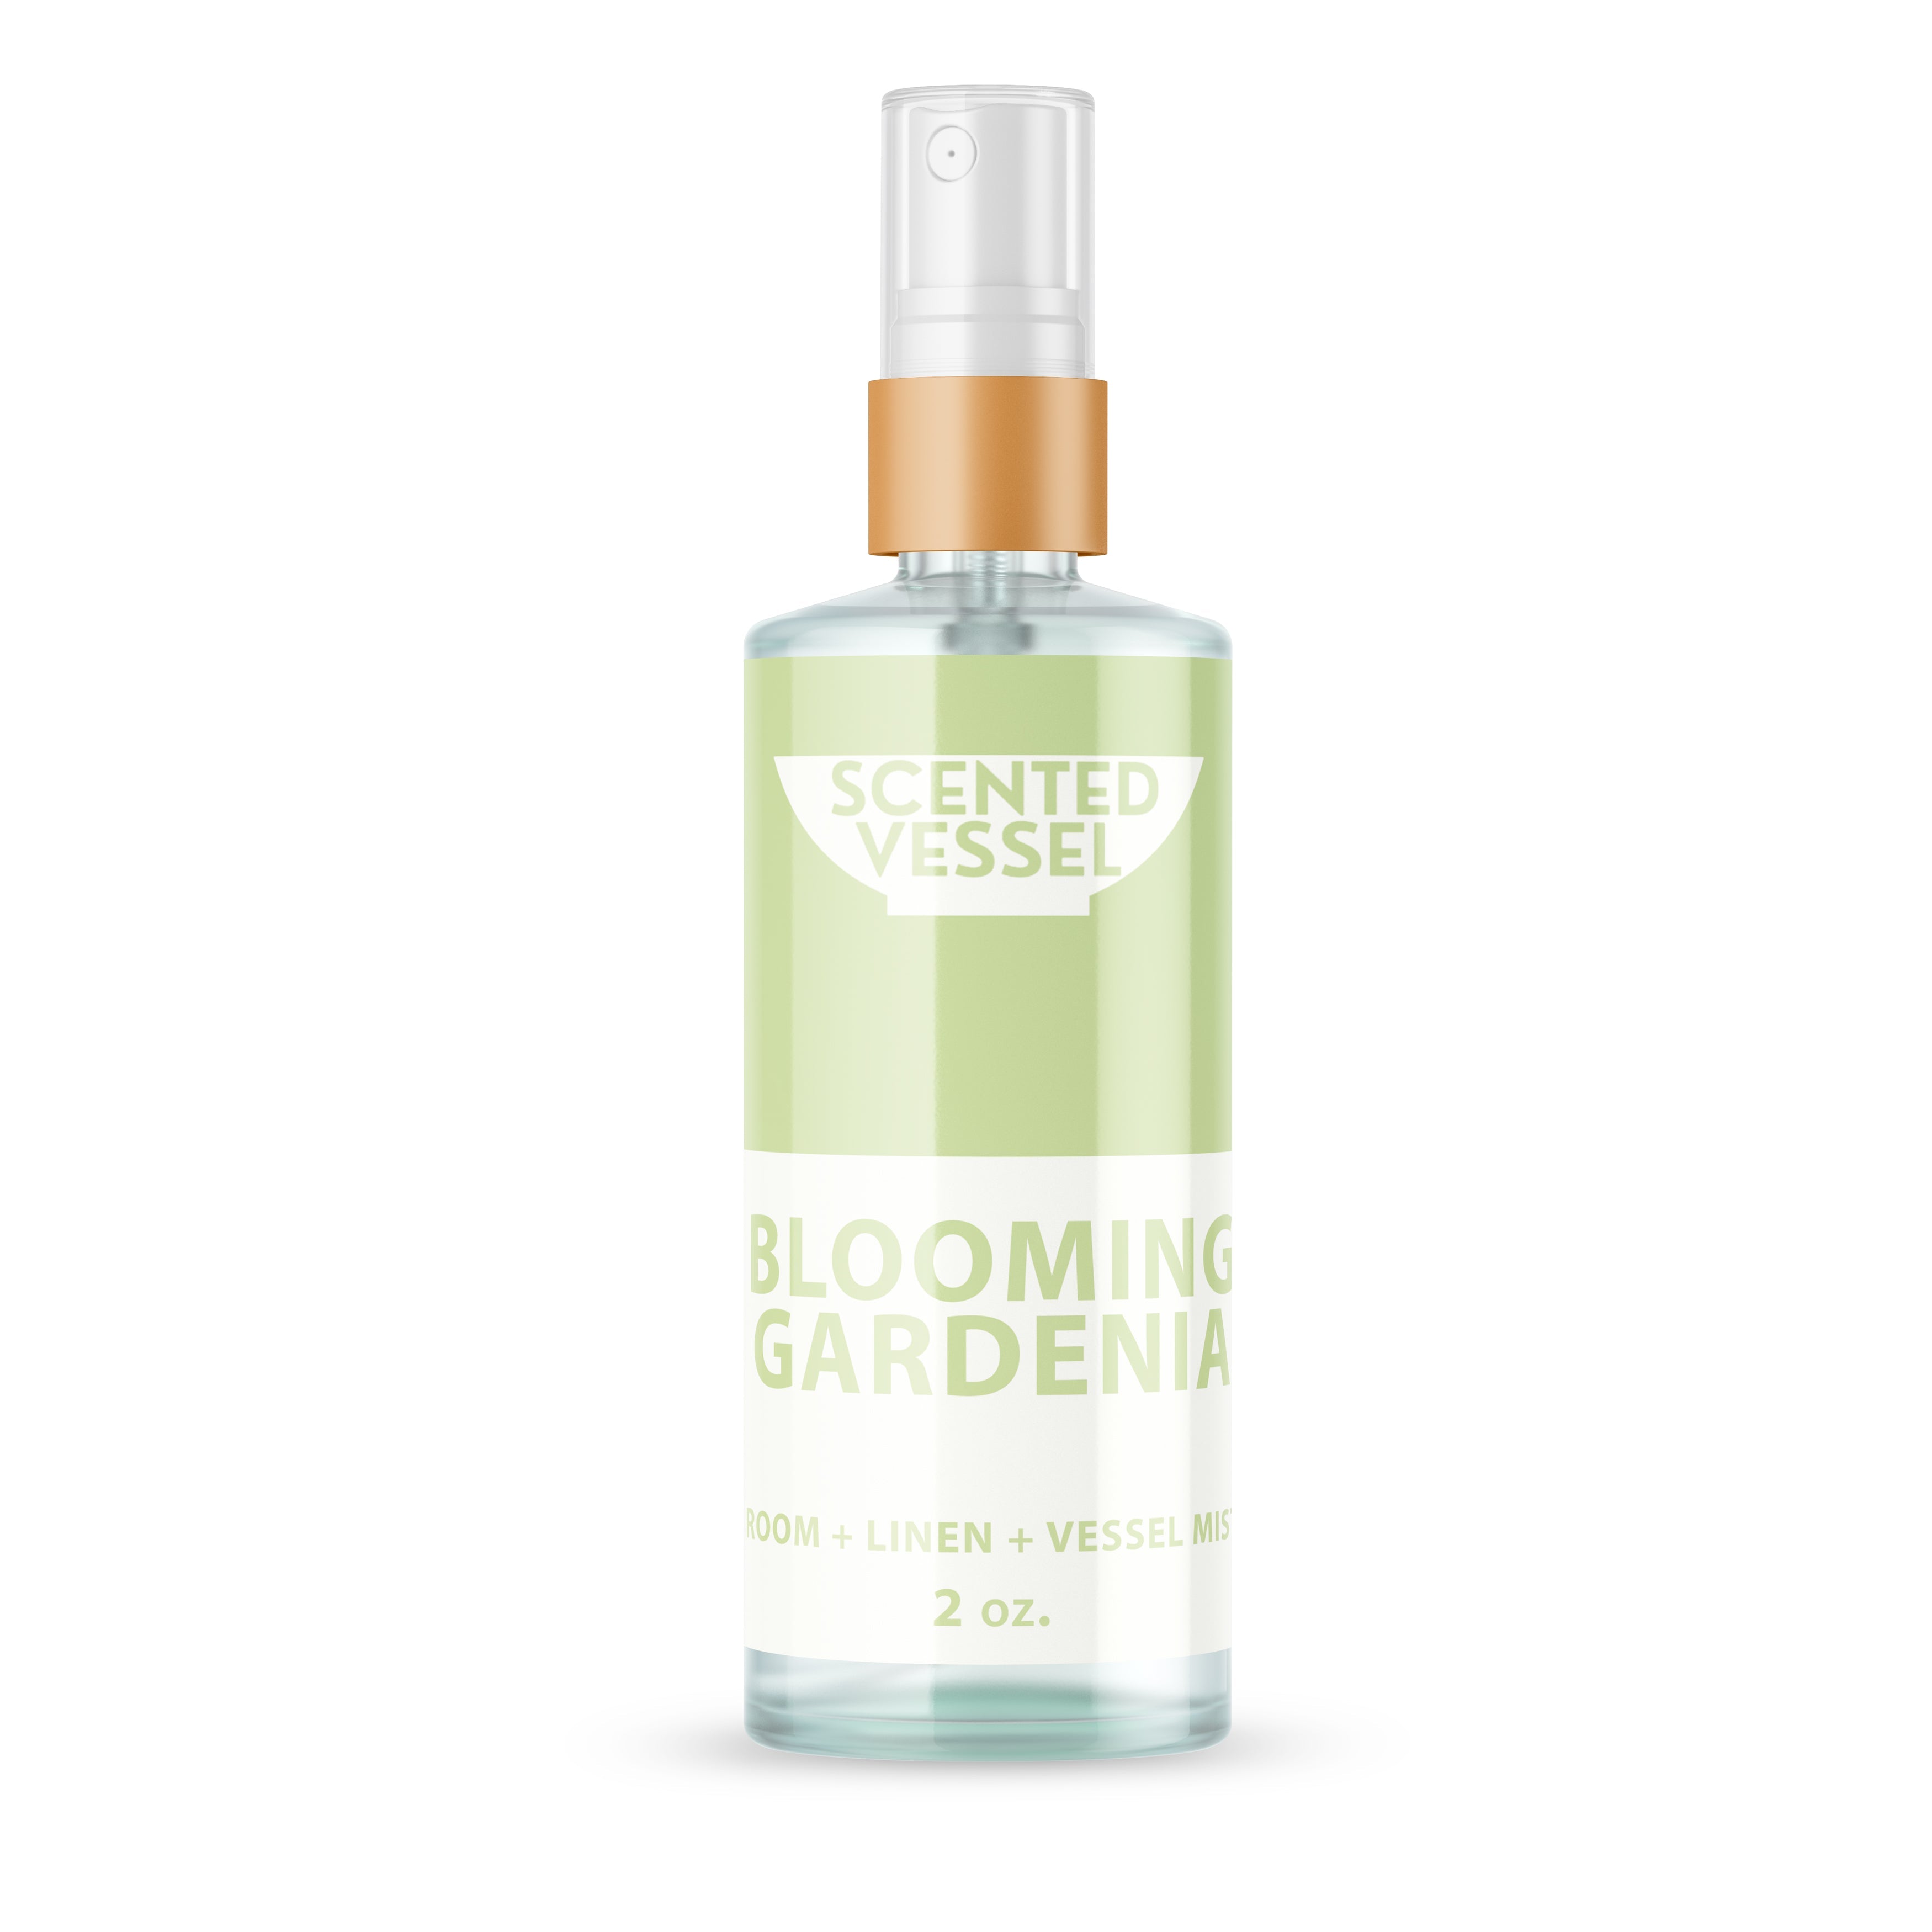 Blooming Gardenia 2oz Fragrance Mist by Scented Vessel